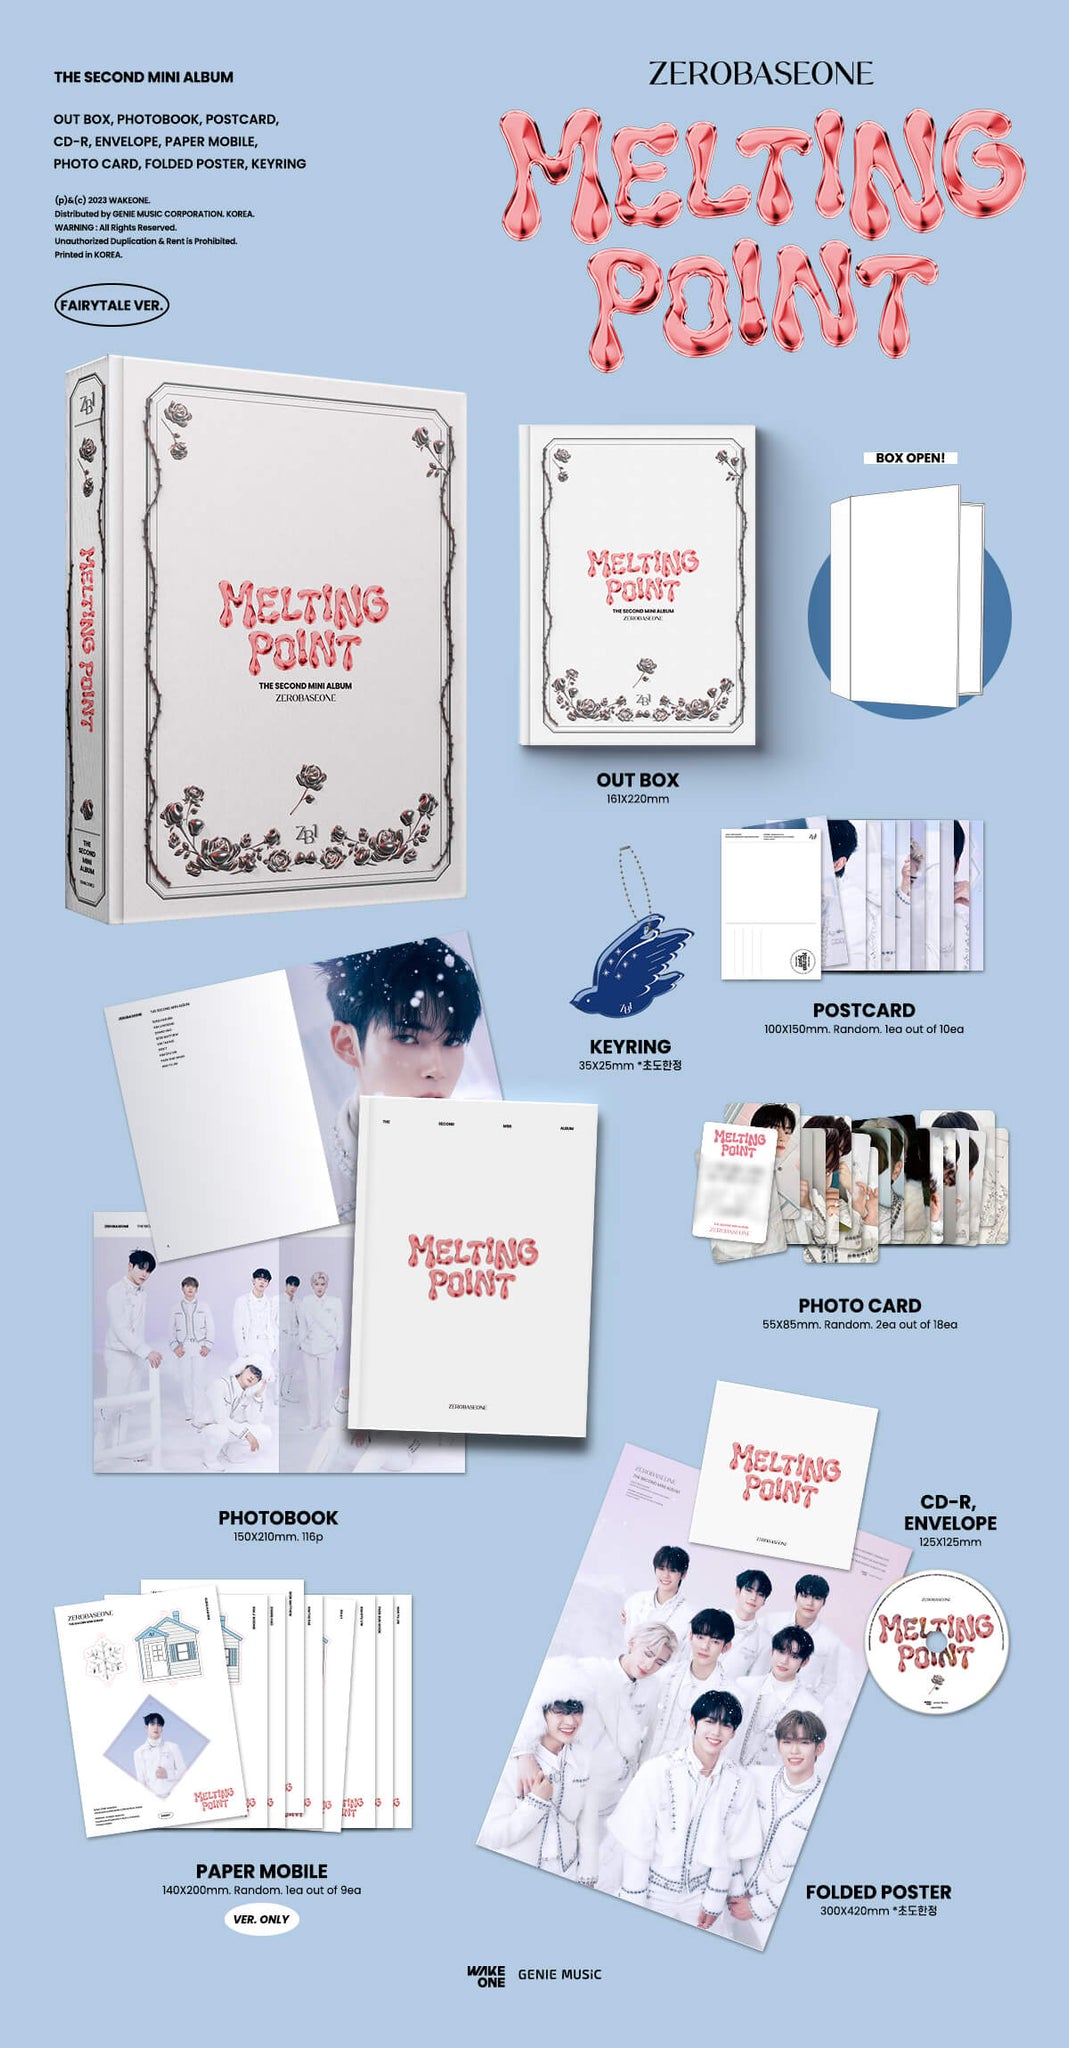 ZEROBASEONE MELTING POINT FAIRYTALE Version Inclusions Out Box Photobook CD Envelope Postcard Photocards Paper Mobile 1st Press Keyring Folded Poster